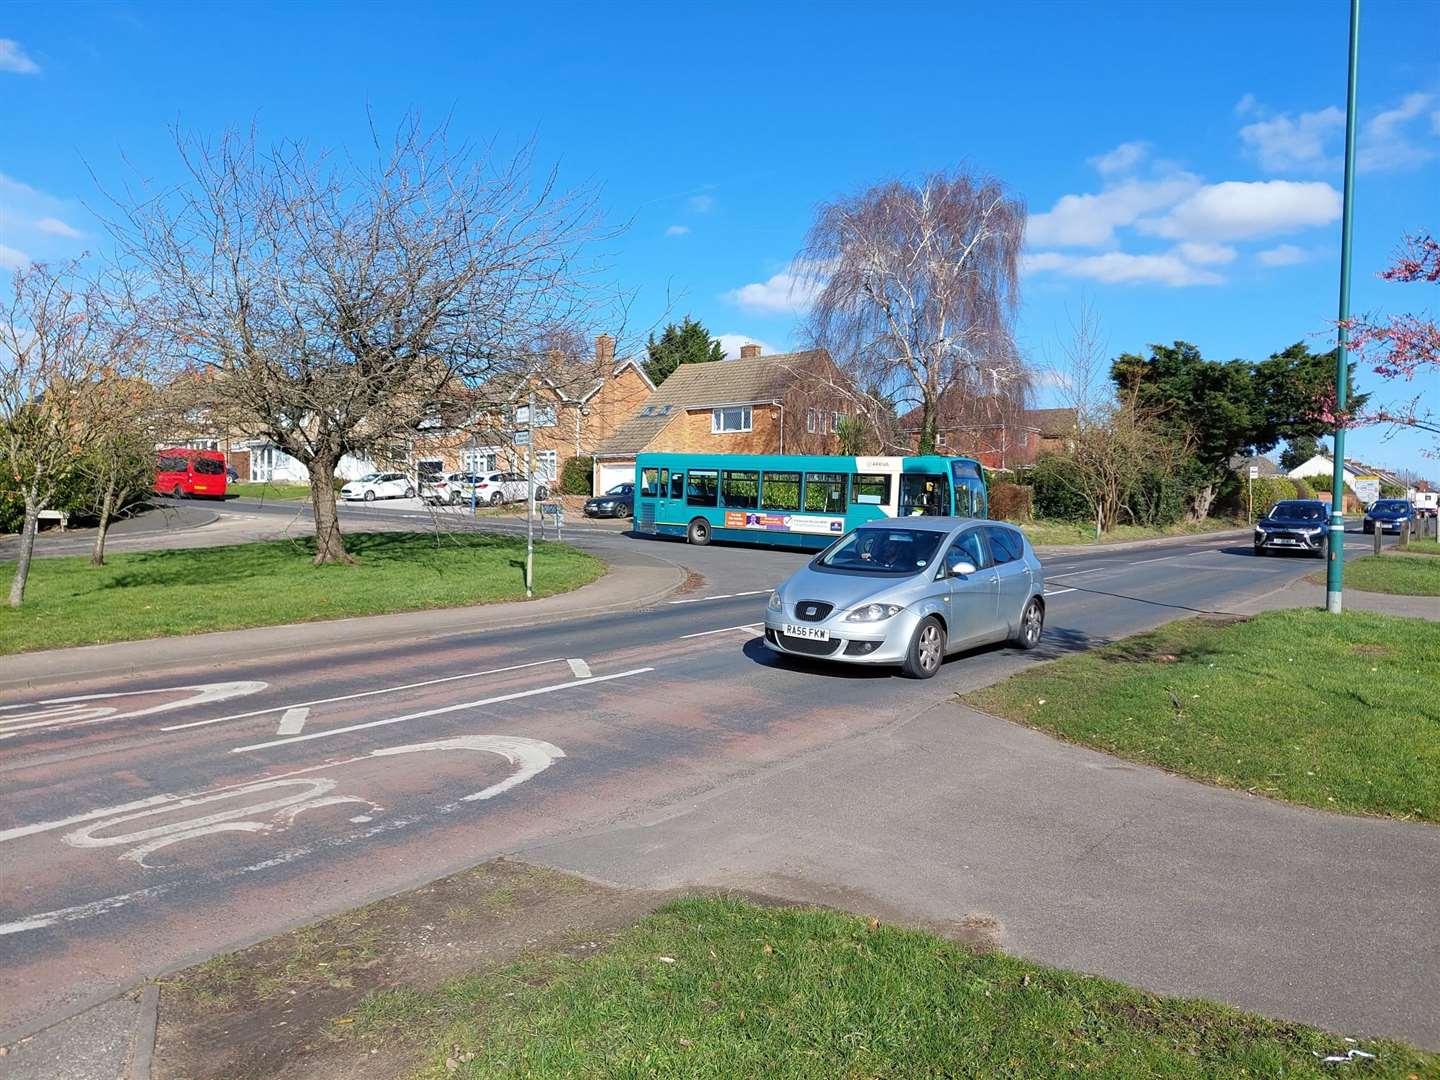 Tonbridge Road in Maidstone, where there is a call for a new pedestrian crossing